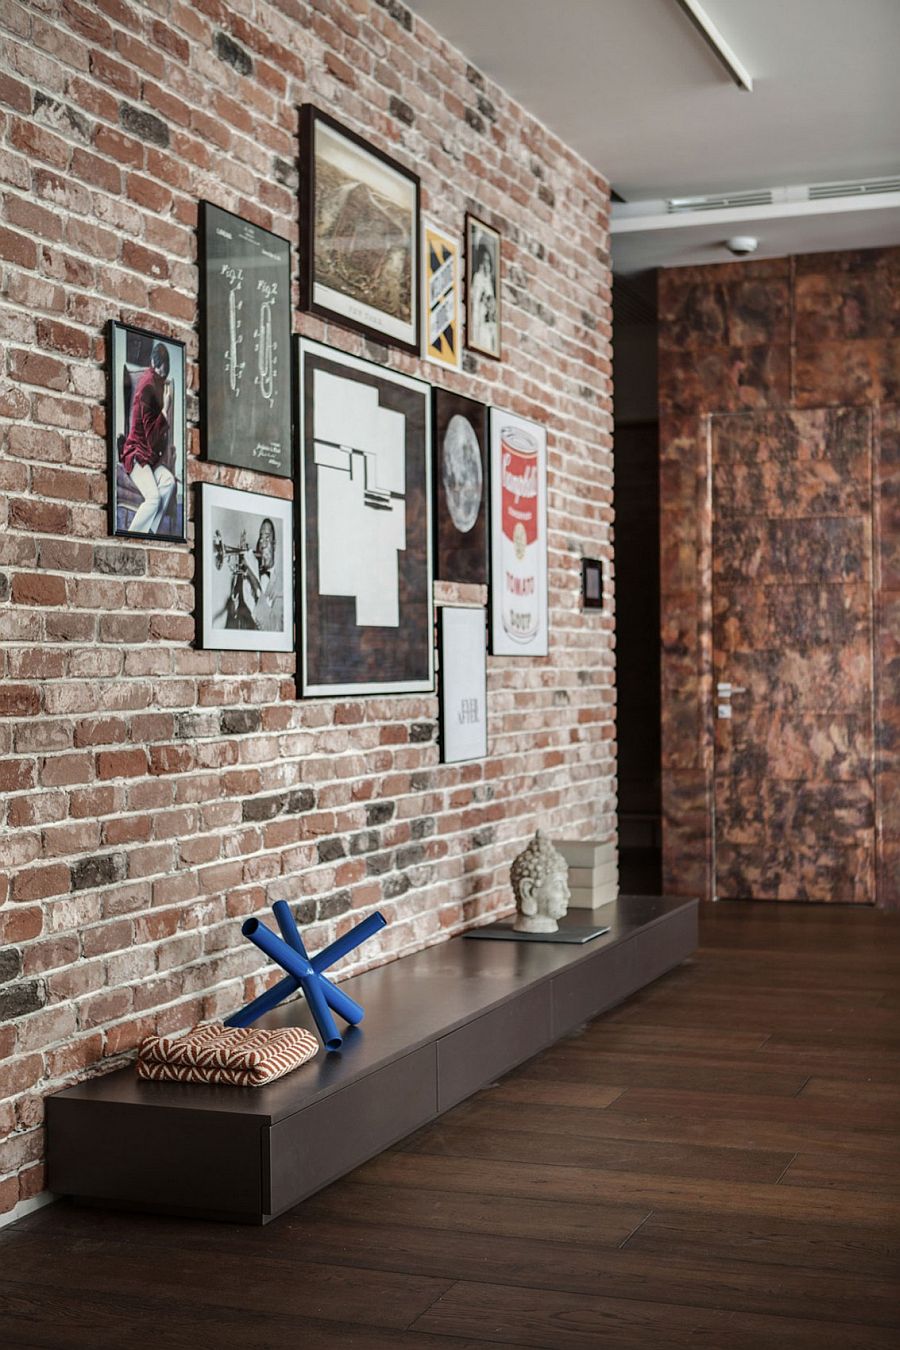 Brick wall turned into a creative gallery wall